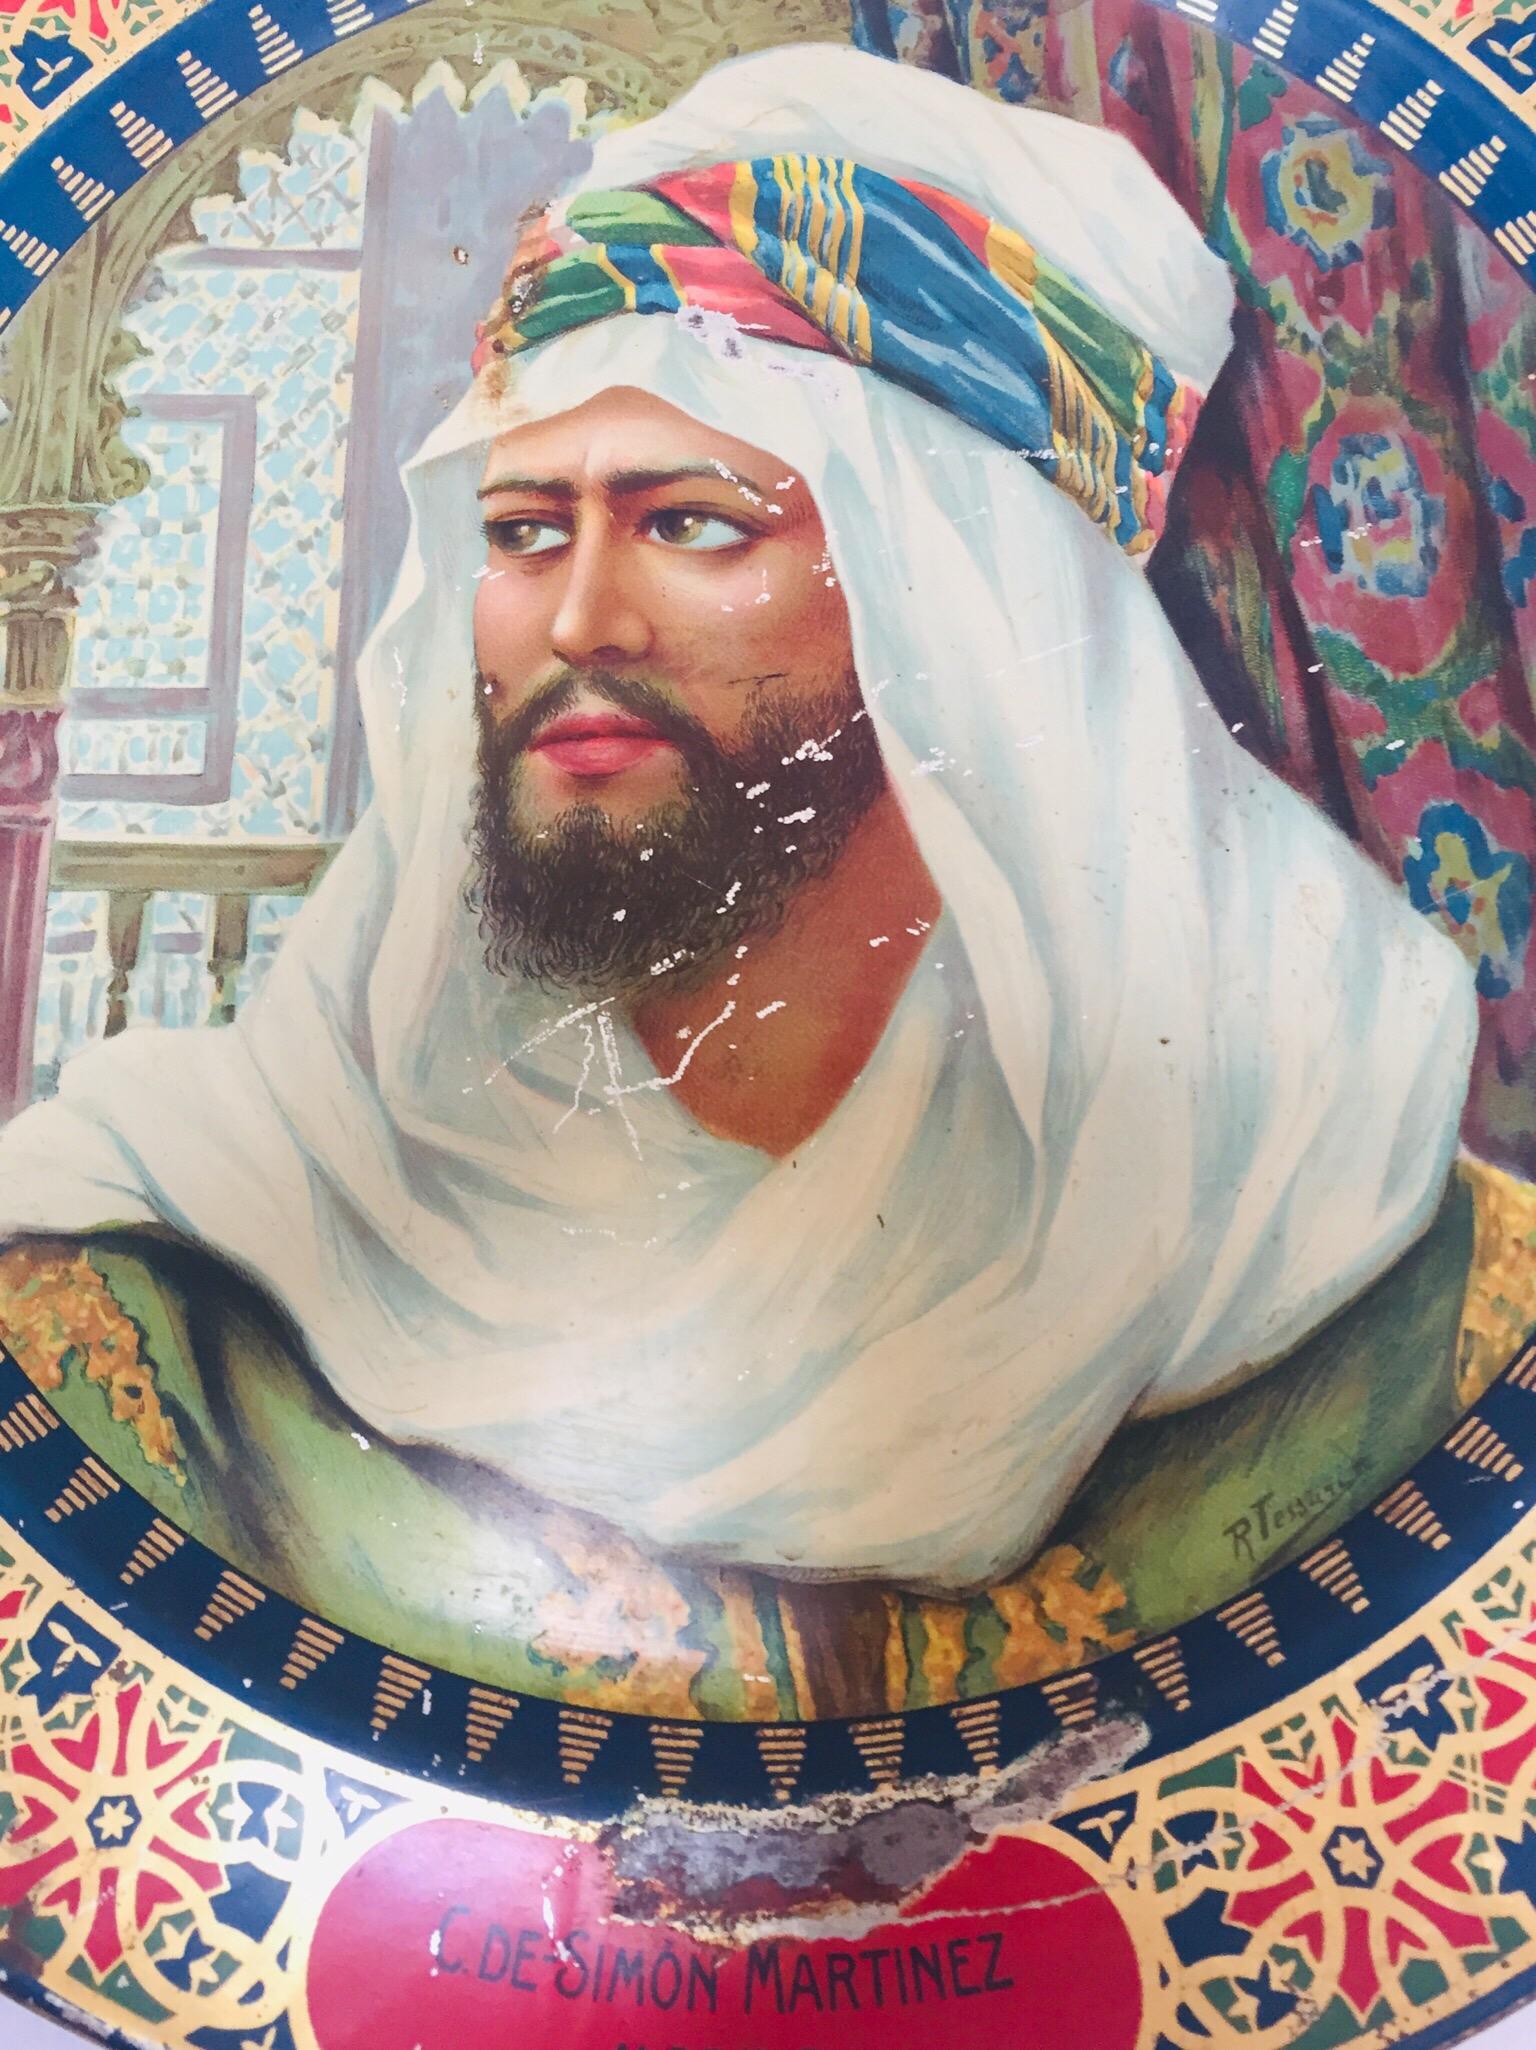 El Cafeto Metal Hanging Advertising Plate with a Moorish Prince 4